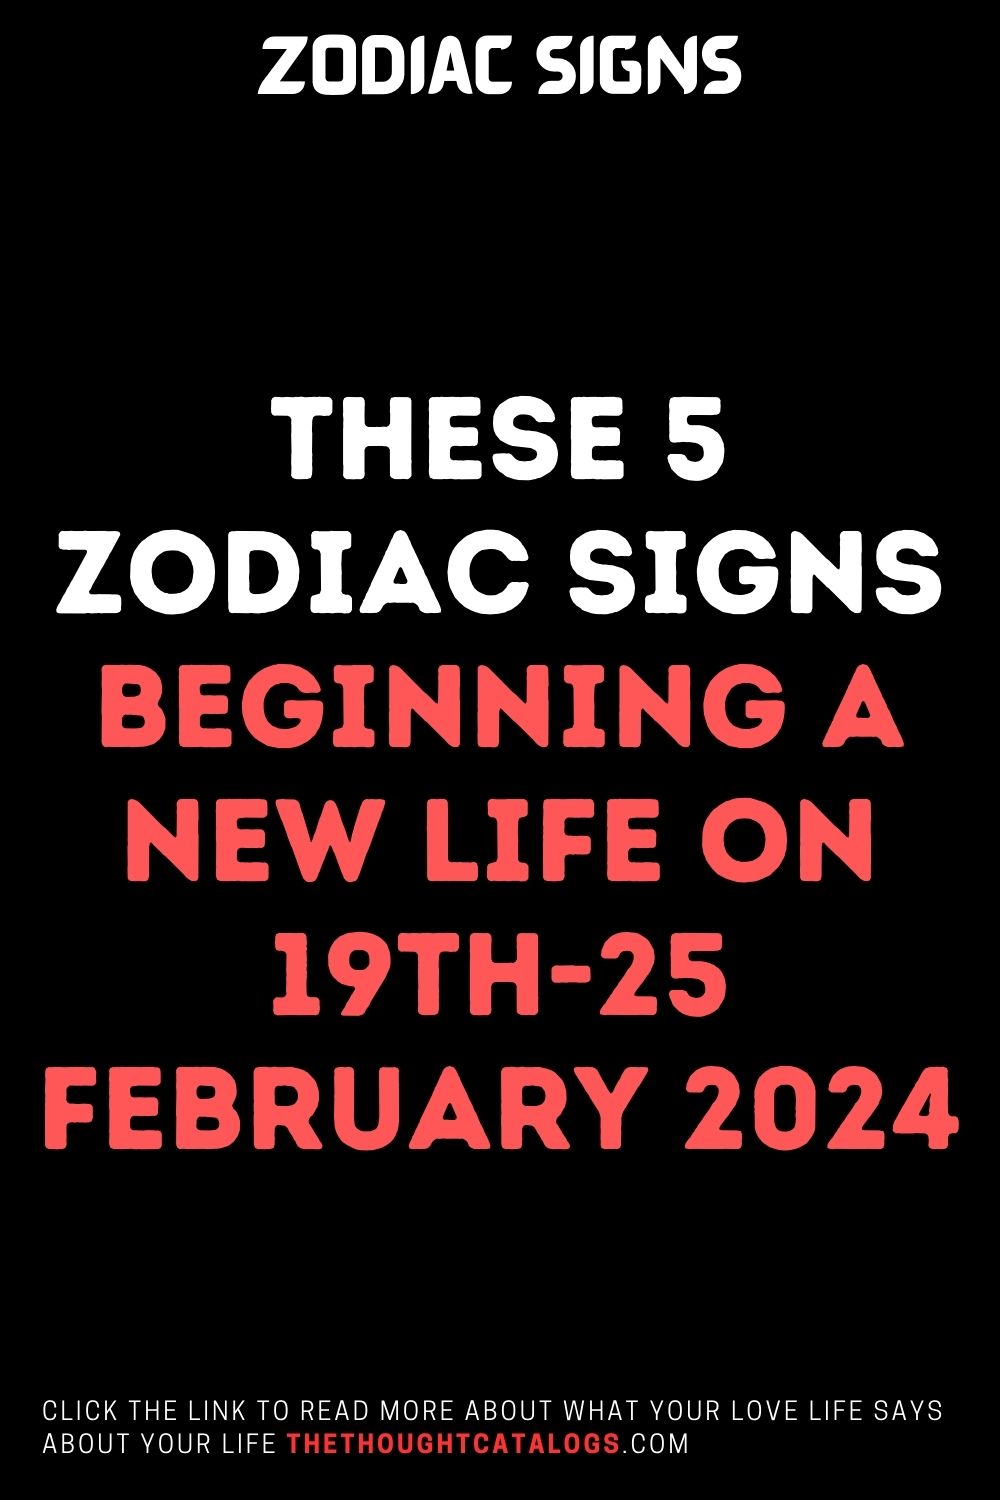 These 5 Zodiac Signs Beginning A New Life On 19th-25 February 2024